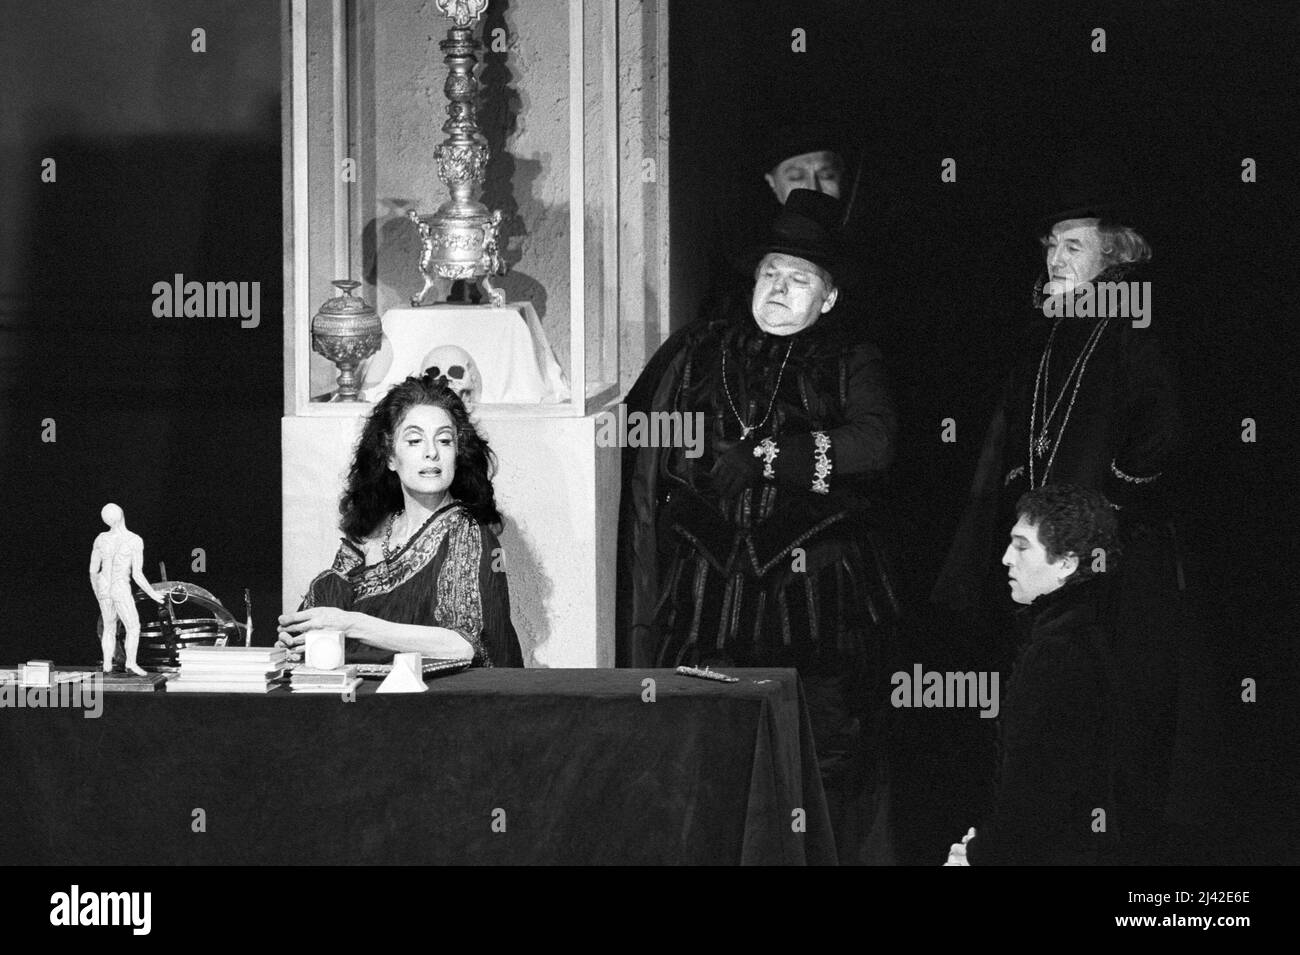 l-r: Eleanor Bron (The Duchess of Malfi), Roy Kinnear (Castruchio), Peter Needham (Forobosco) in THE DUCHESS OF MALFI by John Webster at the Lyttelton Theatre, National Theatre (NT), London SE1 04/07/1985  design and direction: Philip Prowse  lighting: Gerry Jenkinson Stock Photo